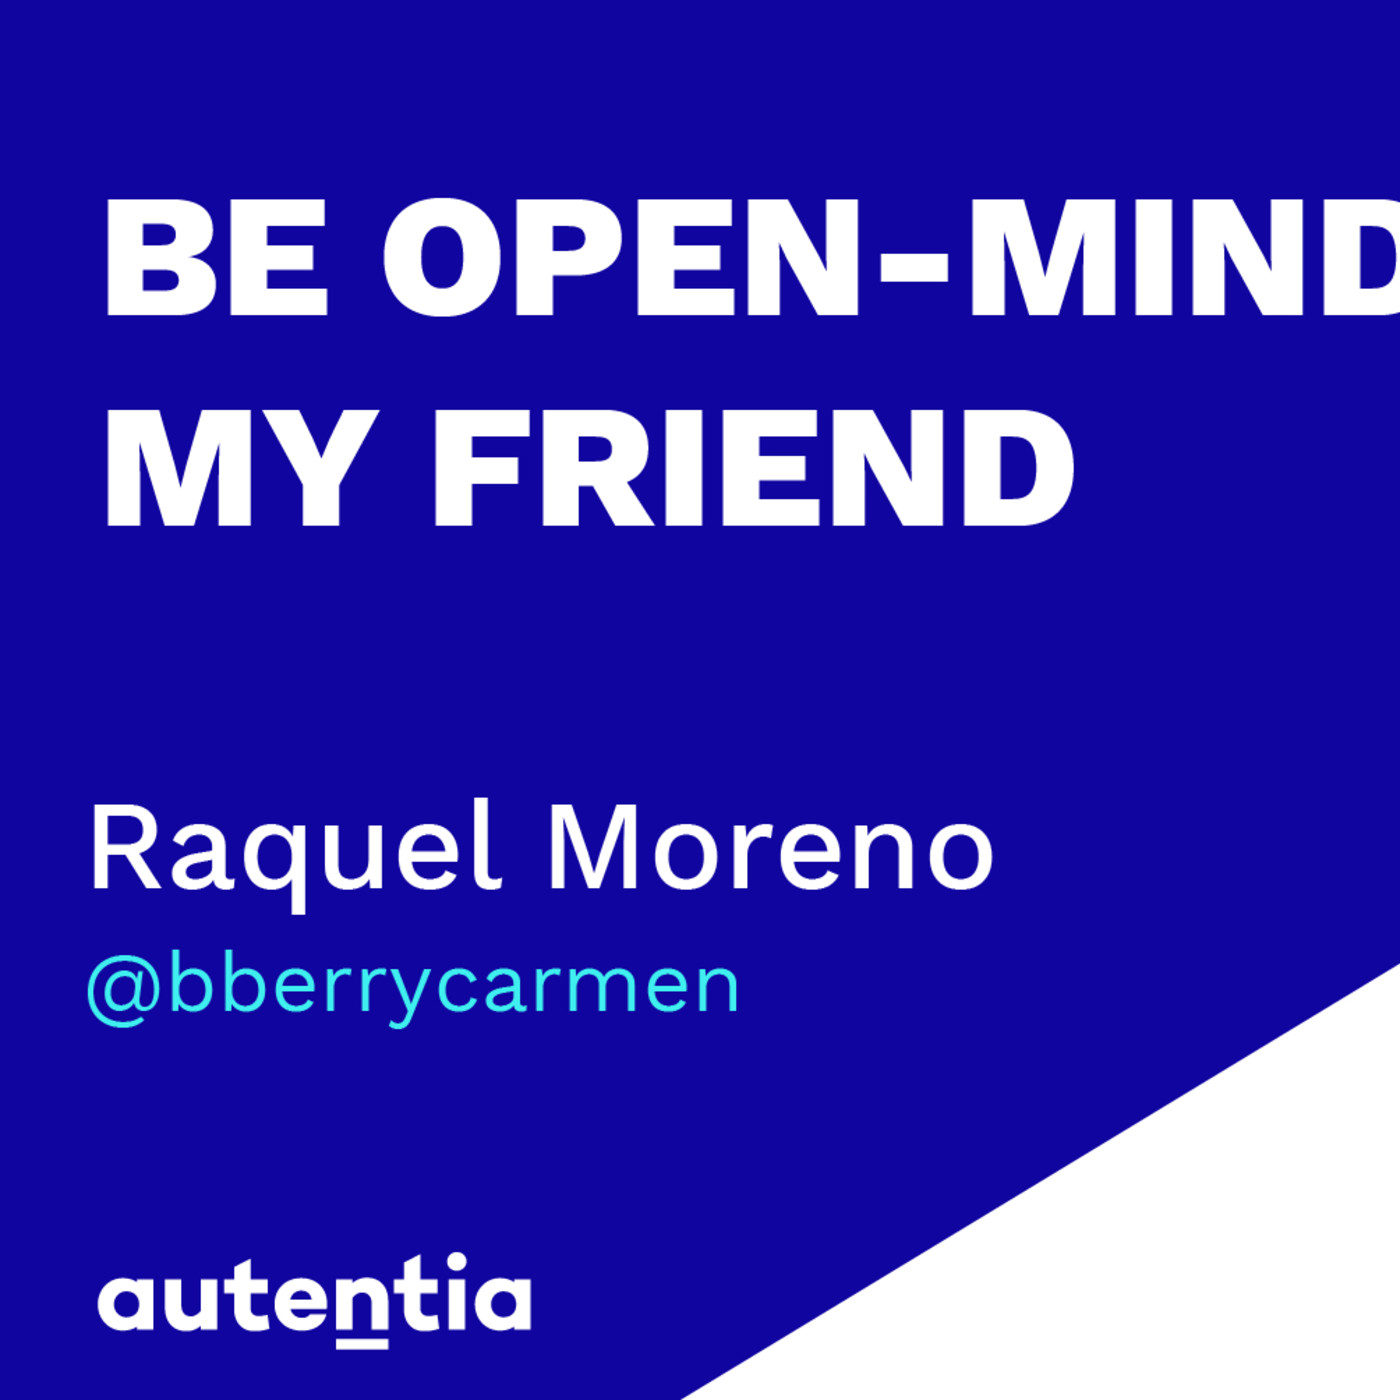 Be open-minded my friend - Raquel Moreno